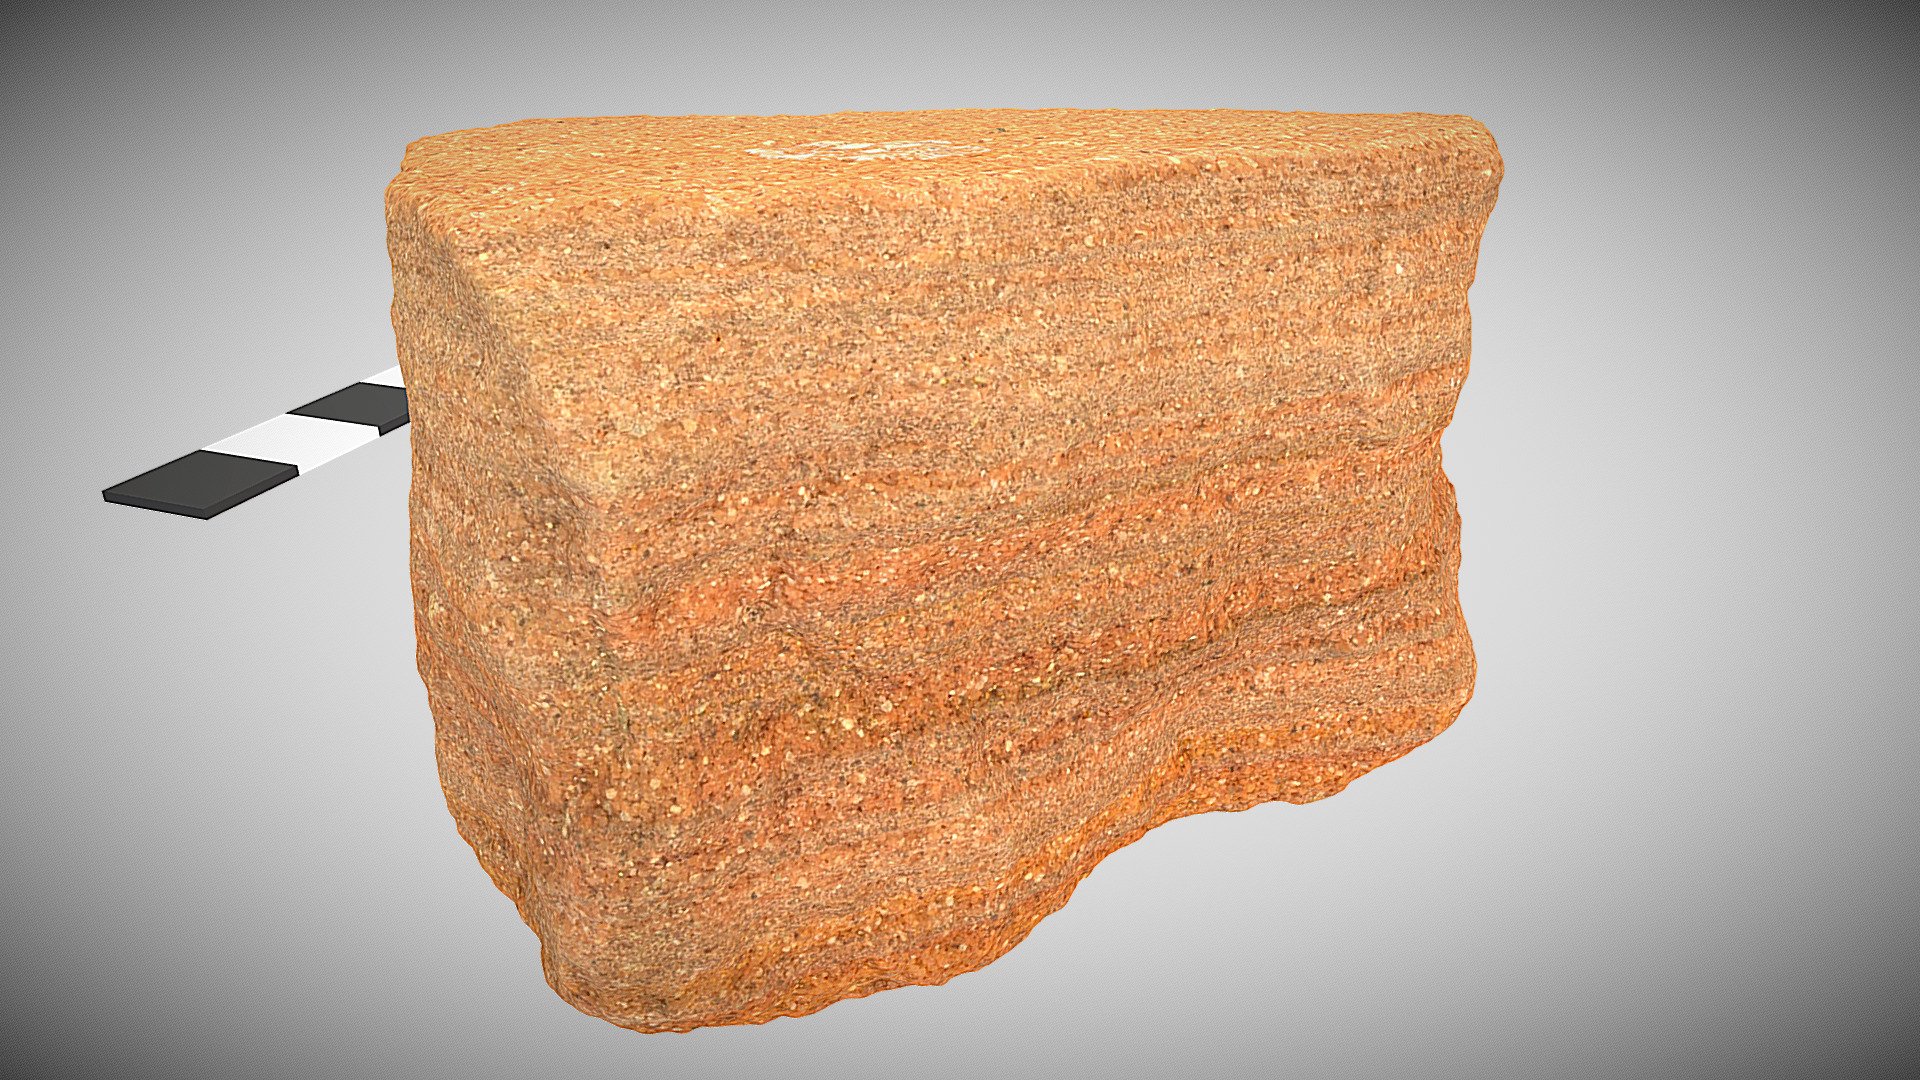 Sandstone is a sedimentary rock. This specimen is from the Woogaroo Formation, southeast Queensland, Australia 3d model